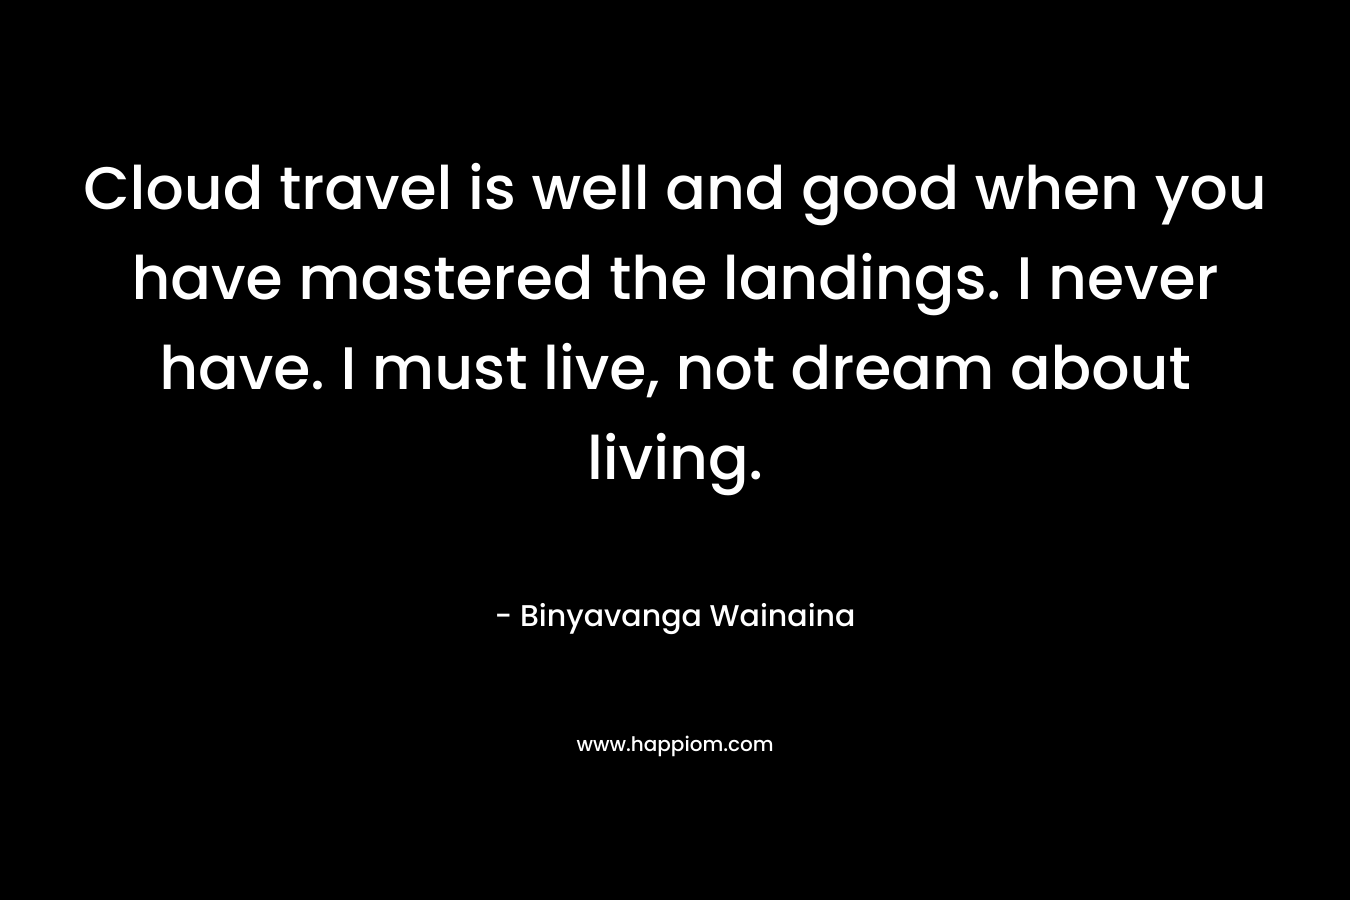 Cloud travel is well and good when you have mastered the landings. I never have. I must live, not dream about living.